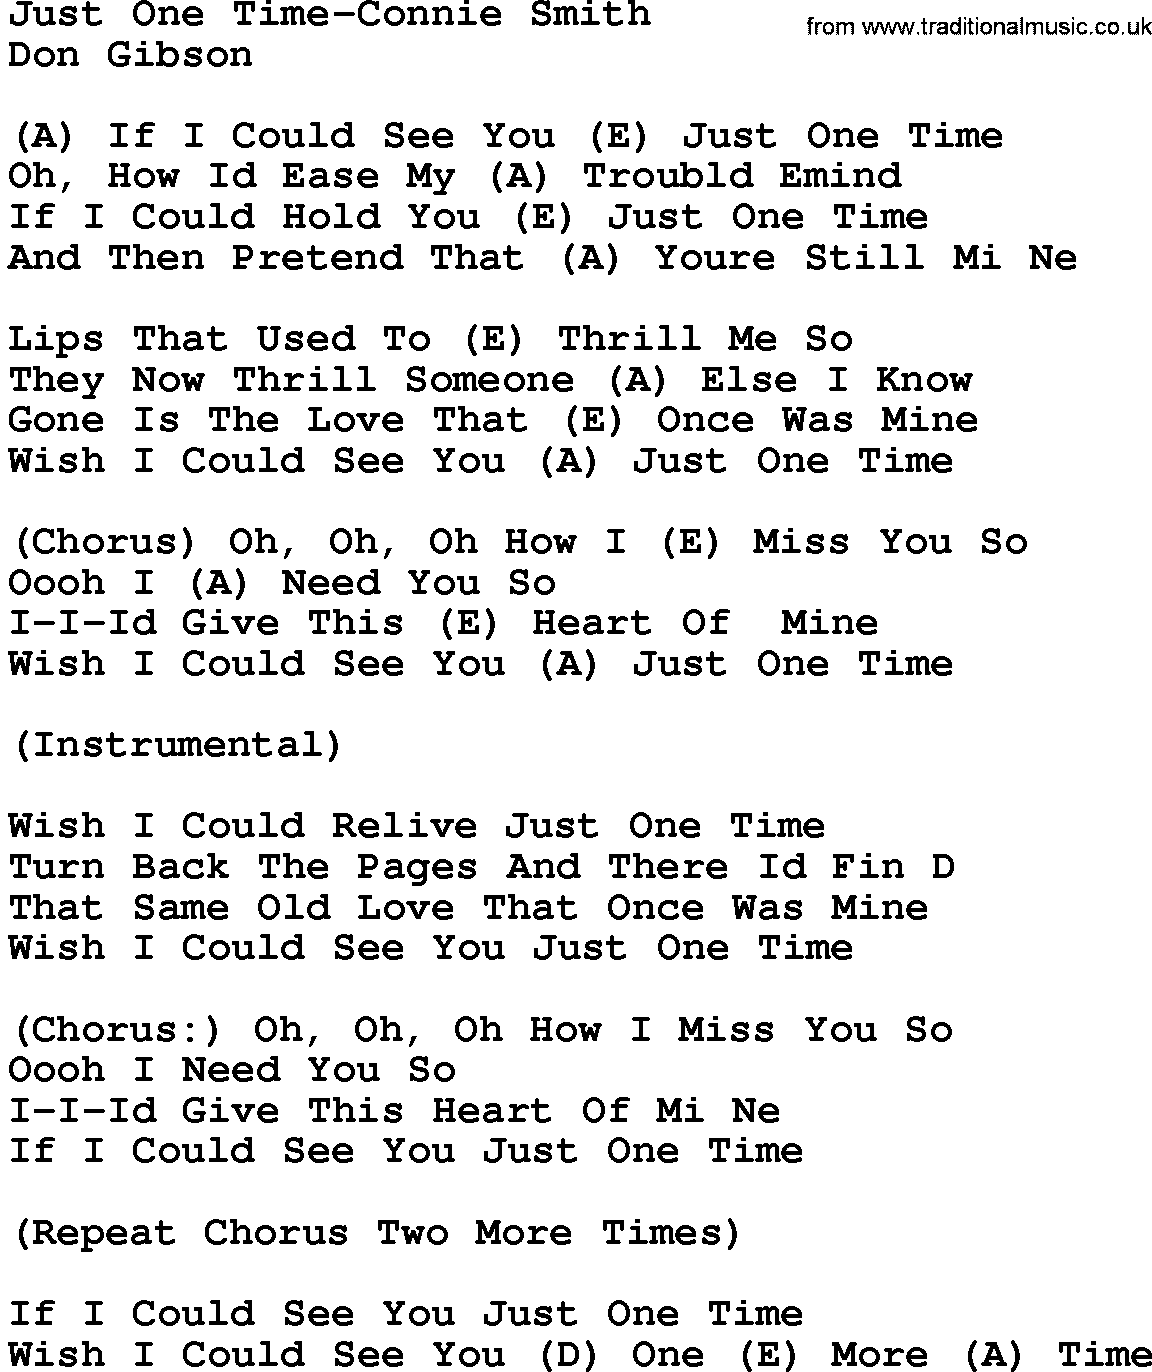 Country music song: Just One Time-Connie Smith lyrics and chords